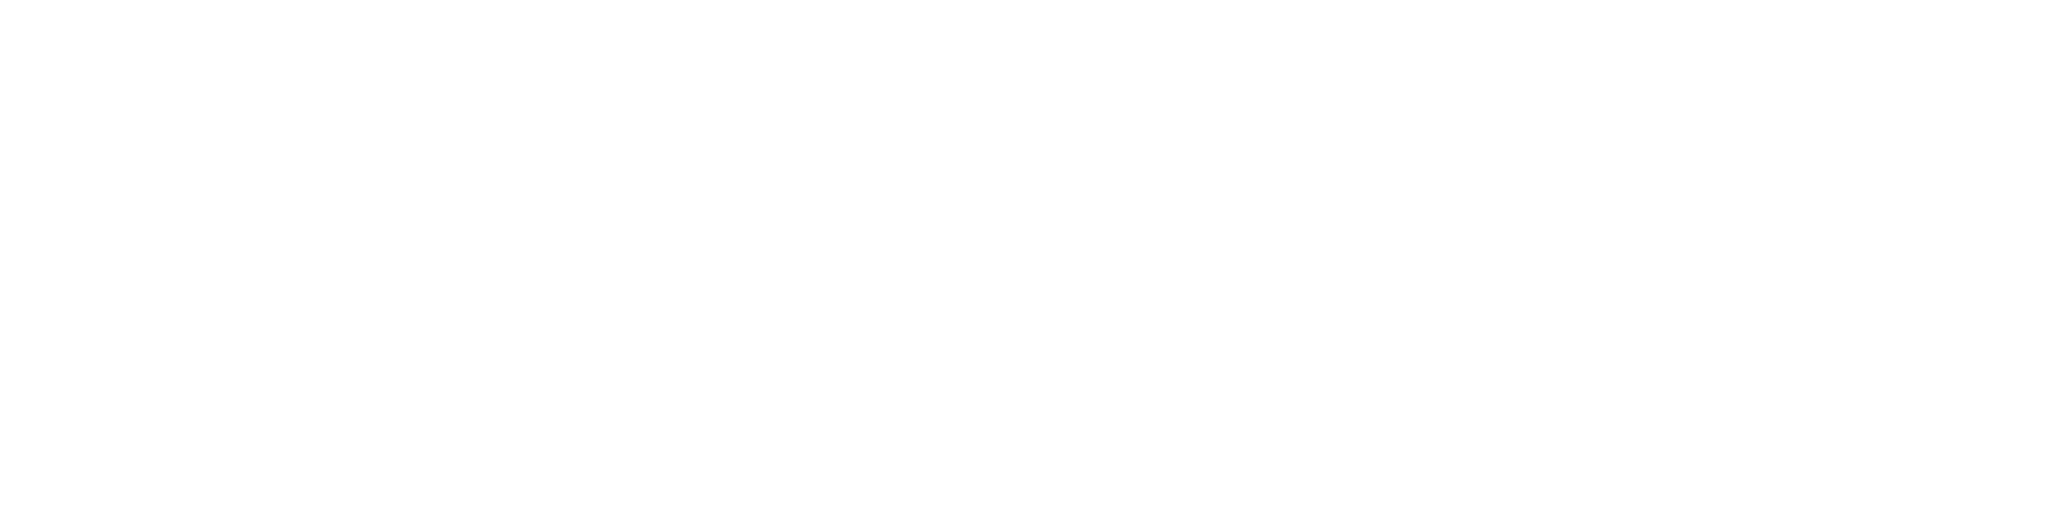 CONTACT-01